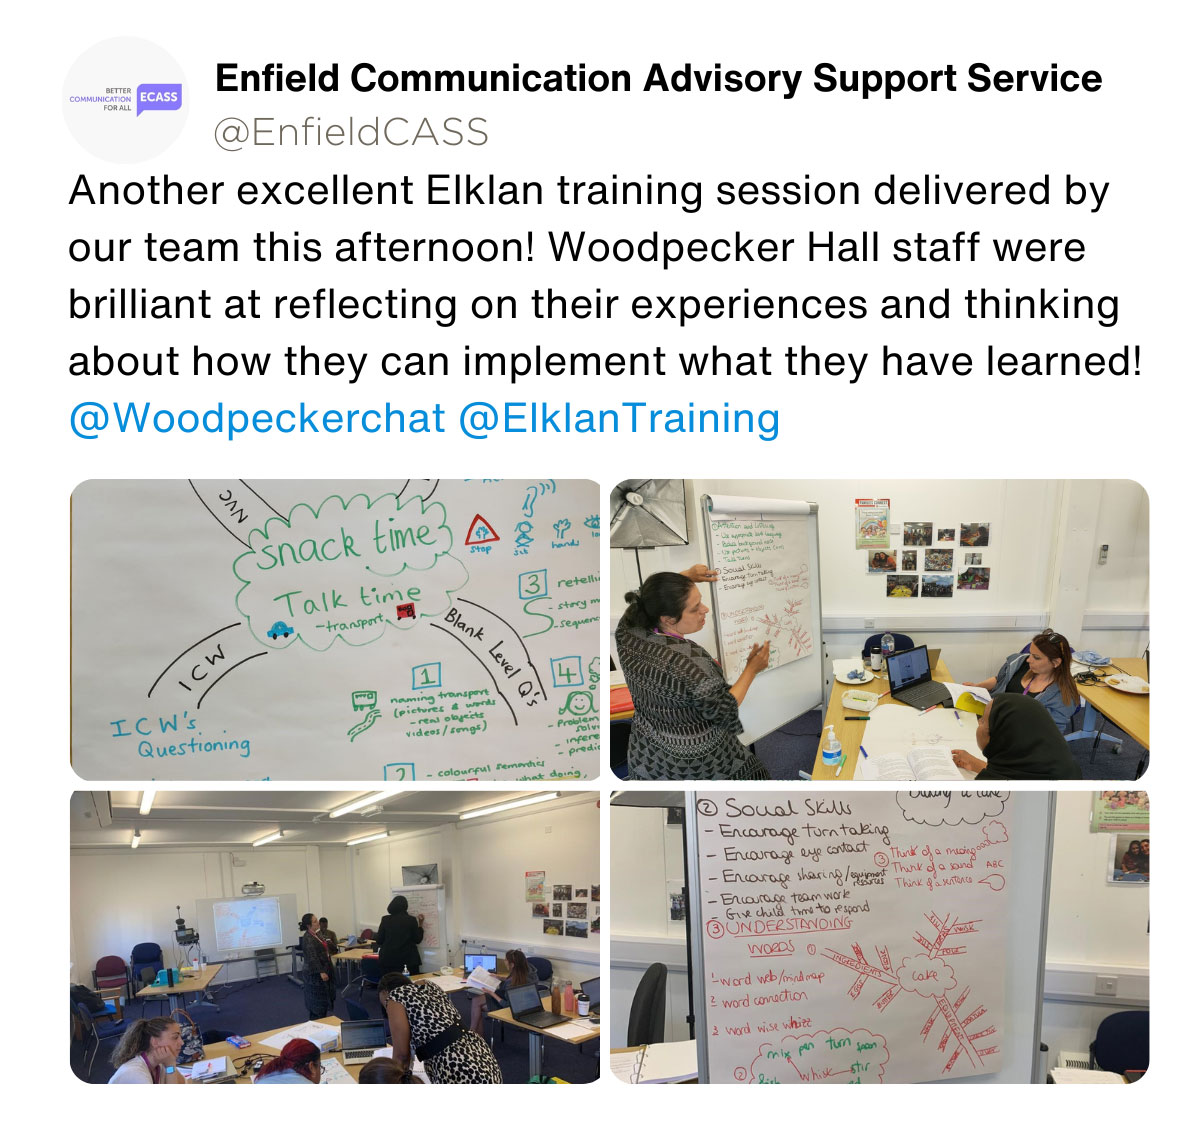 Enfield Communication Advisory Support Service: Another excellent Elklan training session delivered by our team this afternoon! Woodpecker Hall staff were brilliant at reflecting on their experiences and thinking about how they can implement what they have learned!